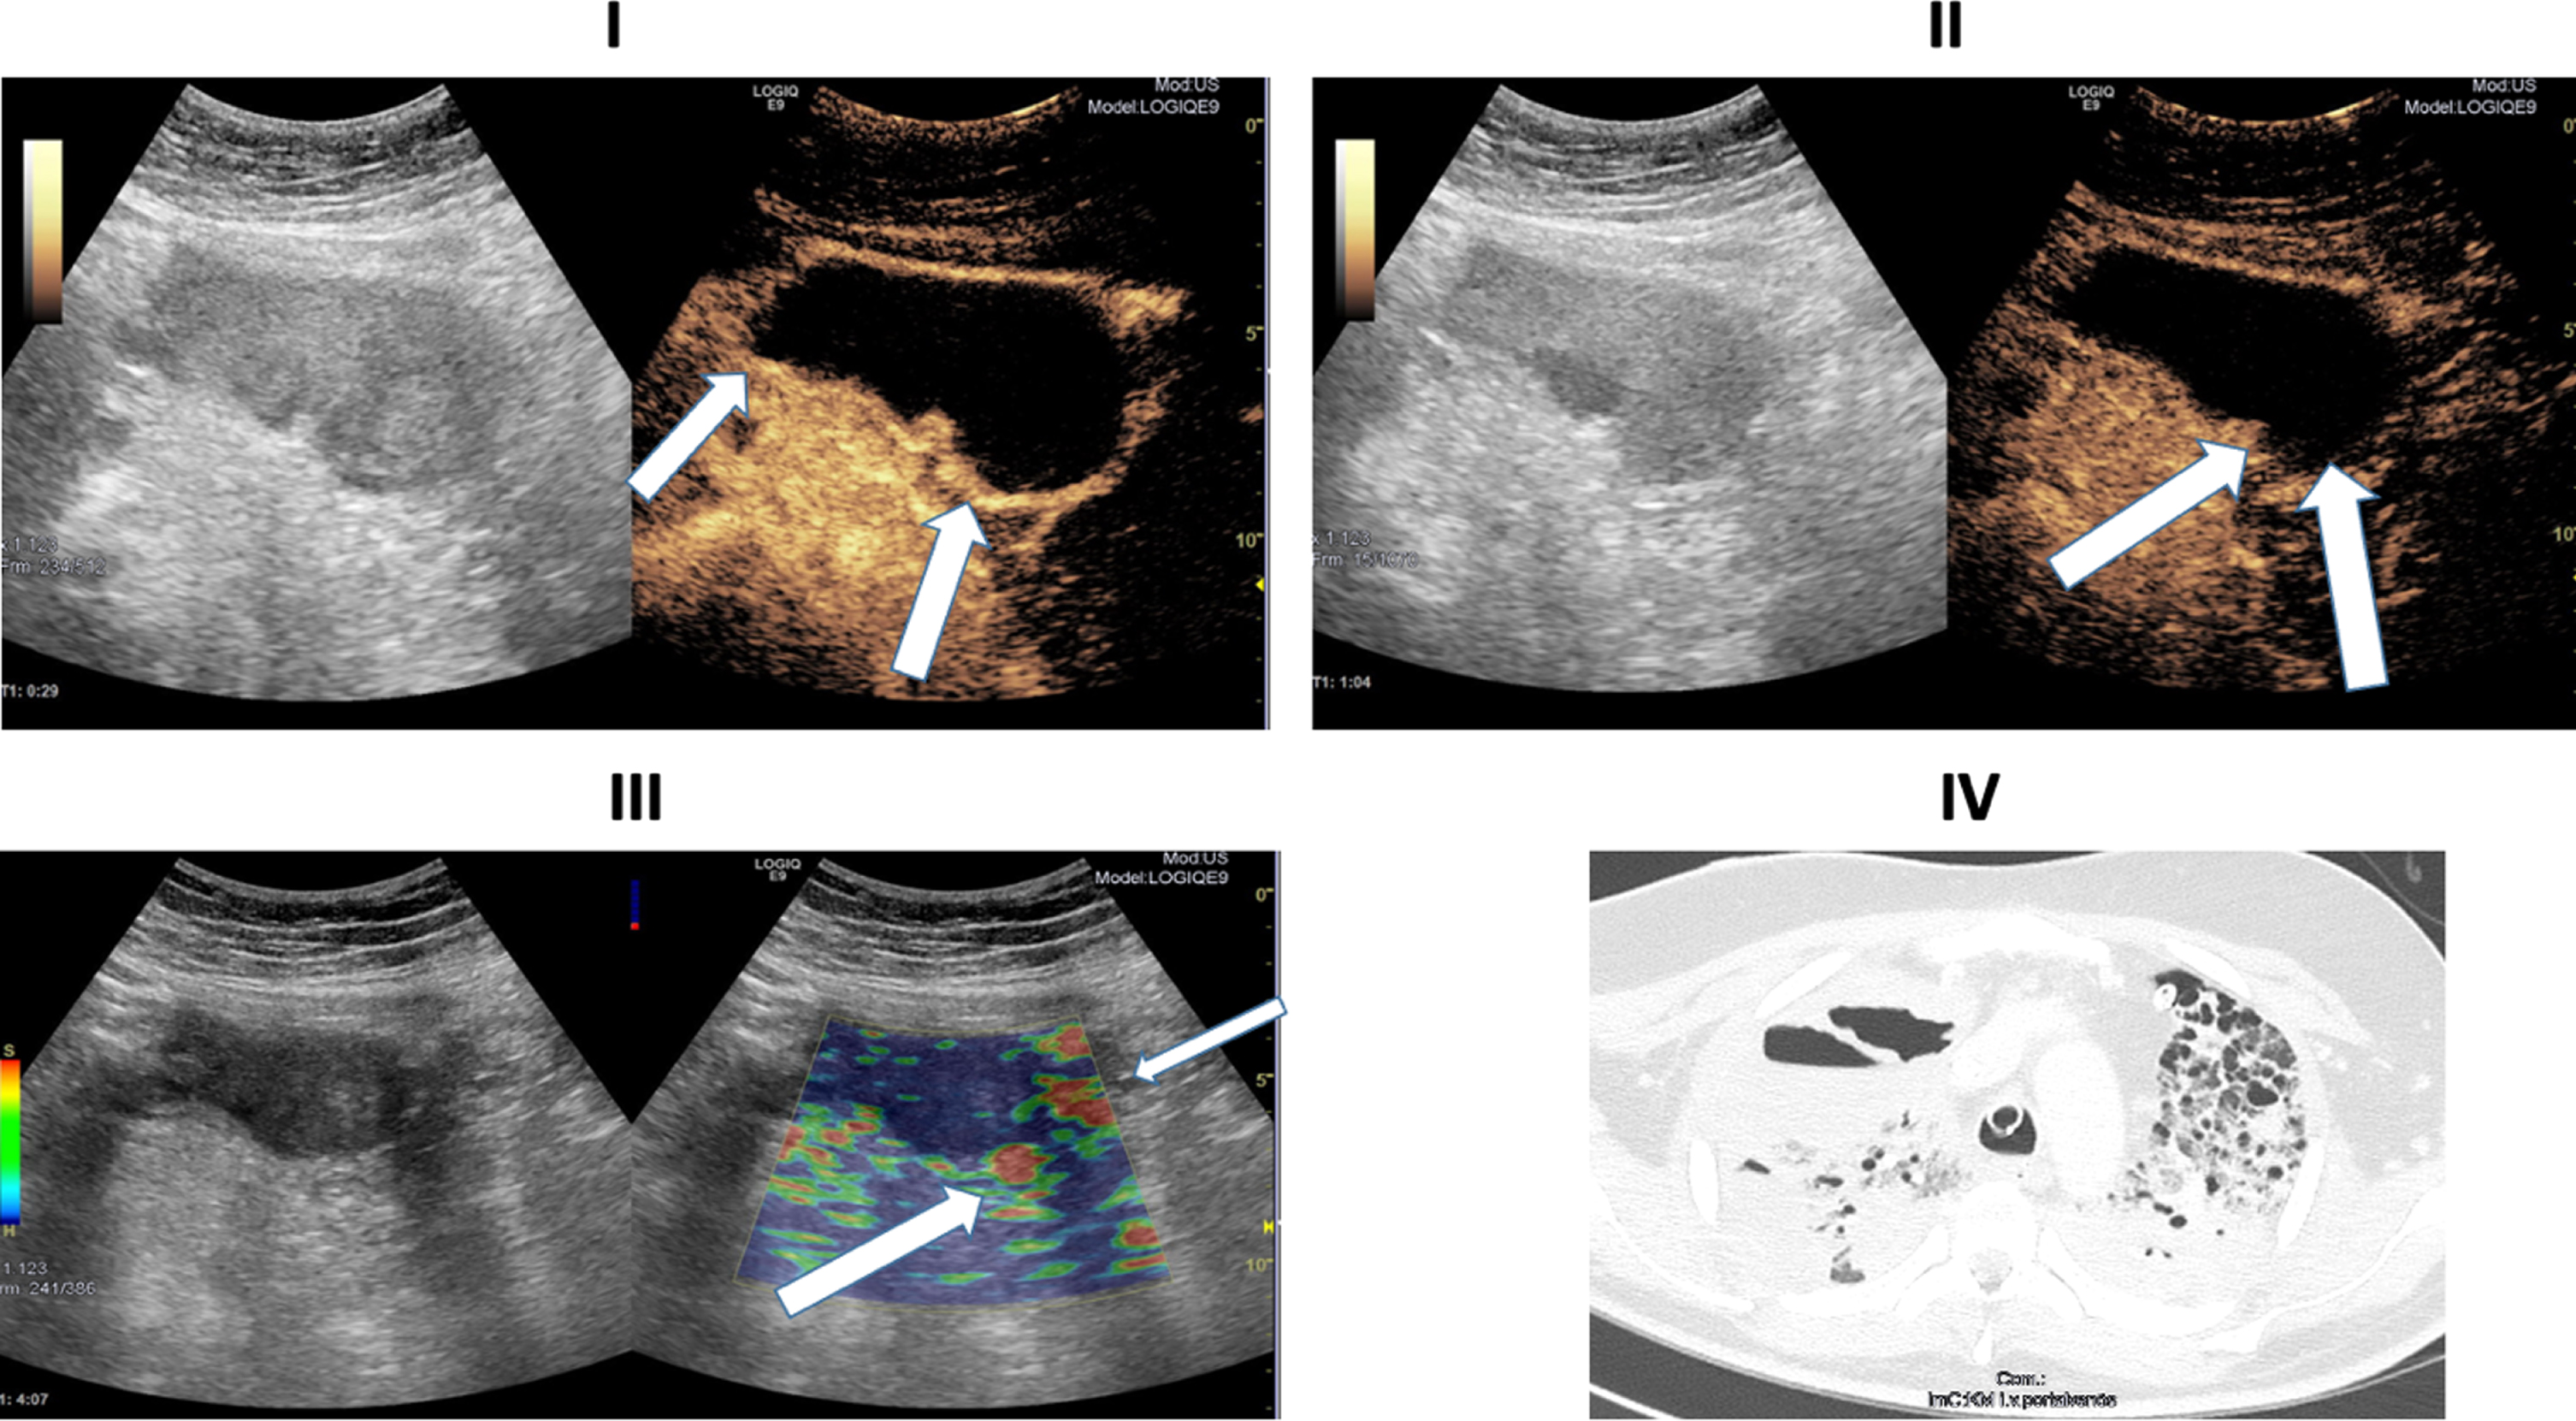 Ultrasound images of a 30-years old-patient with a severe COVID-19 Infection. I: B-Mode ultrasound showing intestinal wall thickening. CEUS image showing early and strong arterial hyperenhancement of the intestinal wall (white arrows) 29 seconds after SonoVue application. II: CEUS imaging showing transmural penetration of microbubbles (white arrows). III: Soft tissue edema as a correlate of acute inflammation by strain elastography (white arrows). IV: CT of the lung. 39 days after COVID-19 diagnosis.